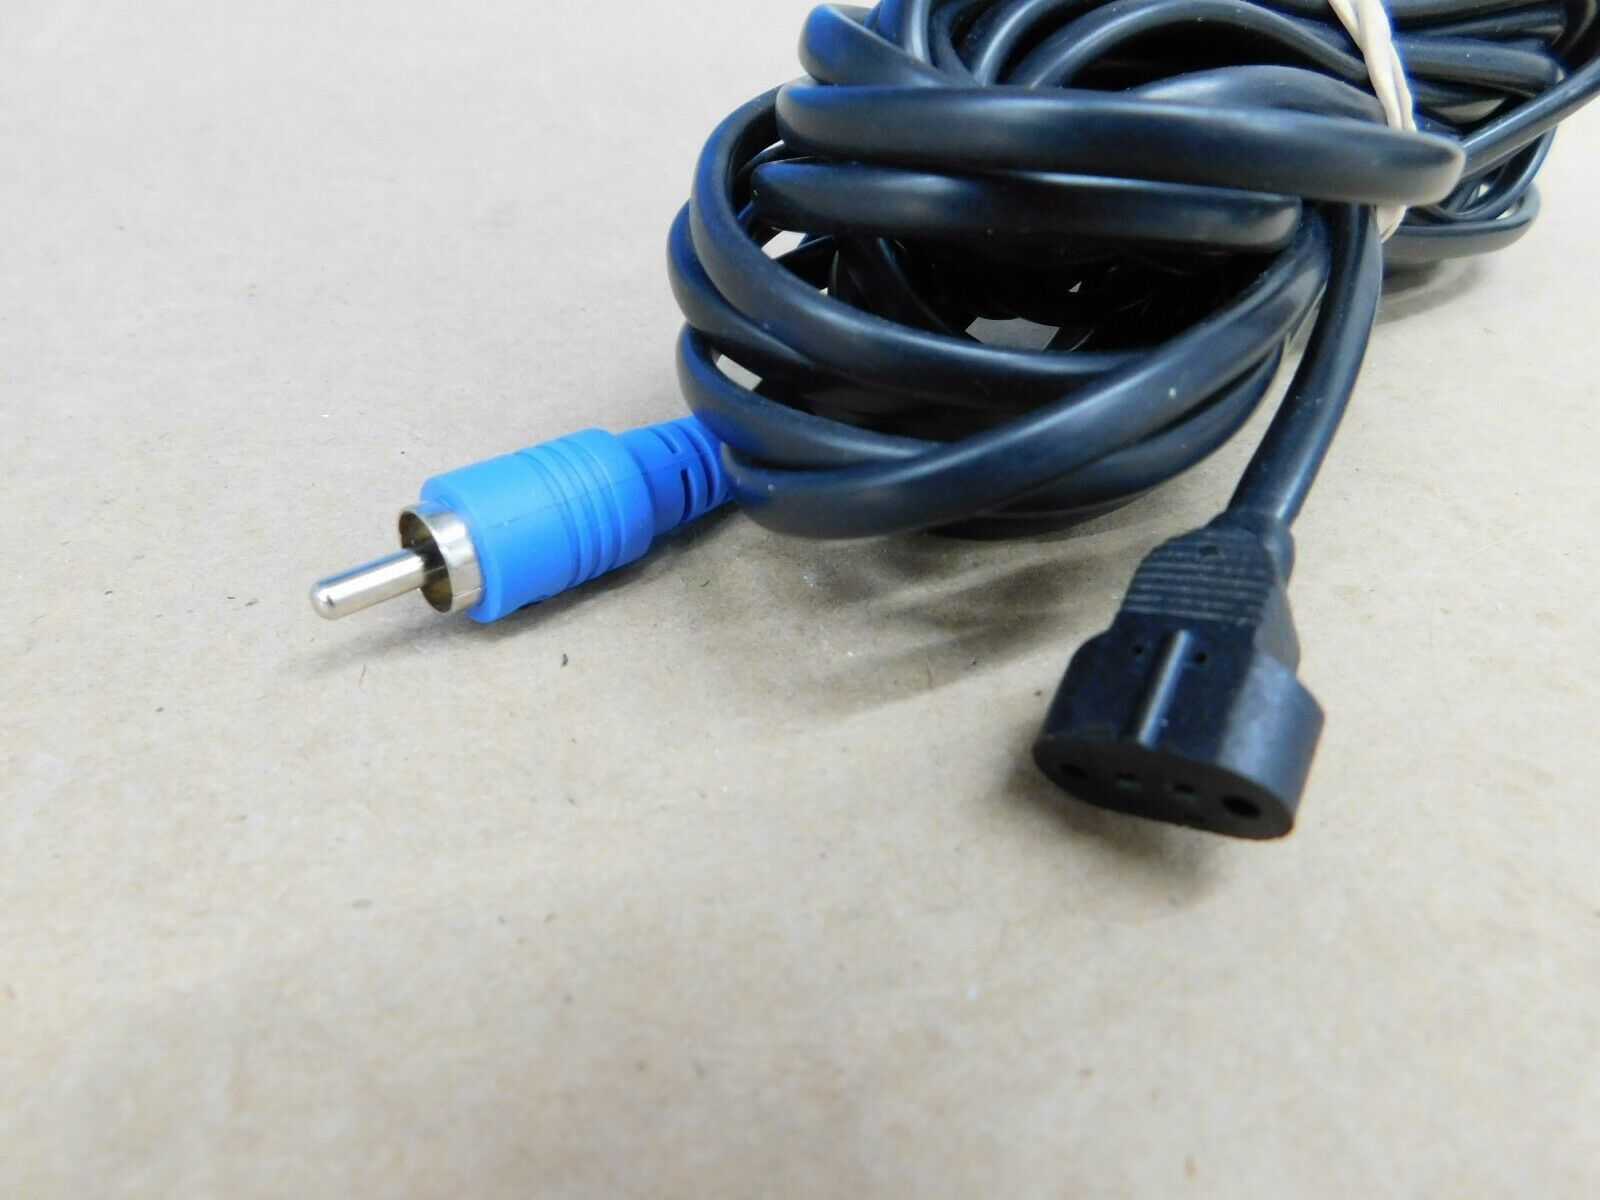 Bose mini Jewel, GS speaker cable - one 20 ft cable